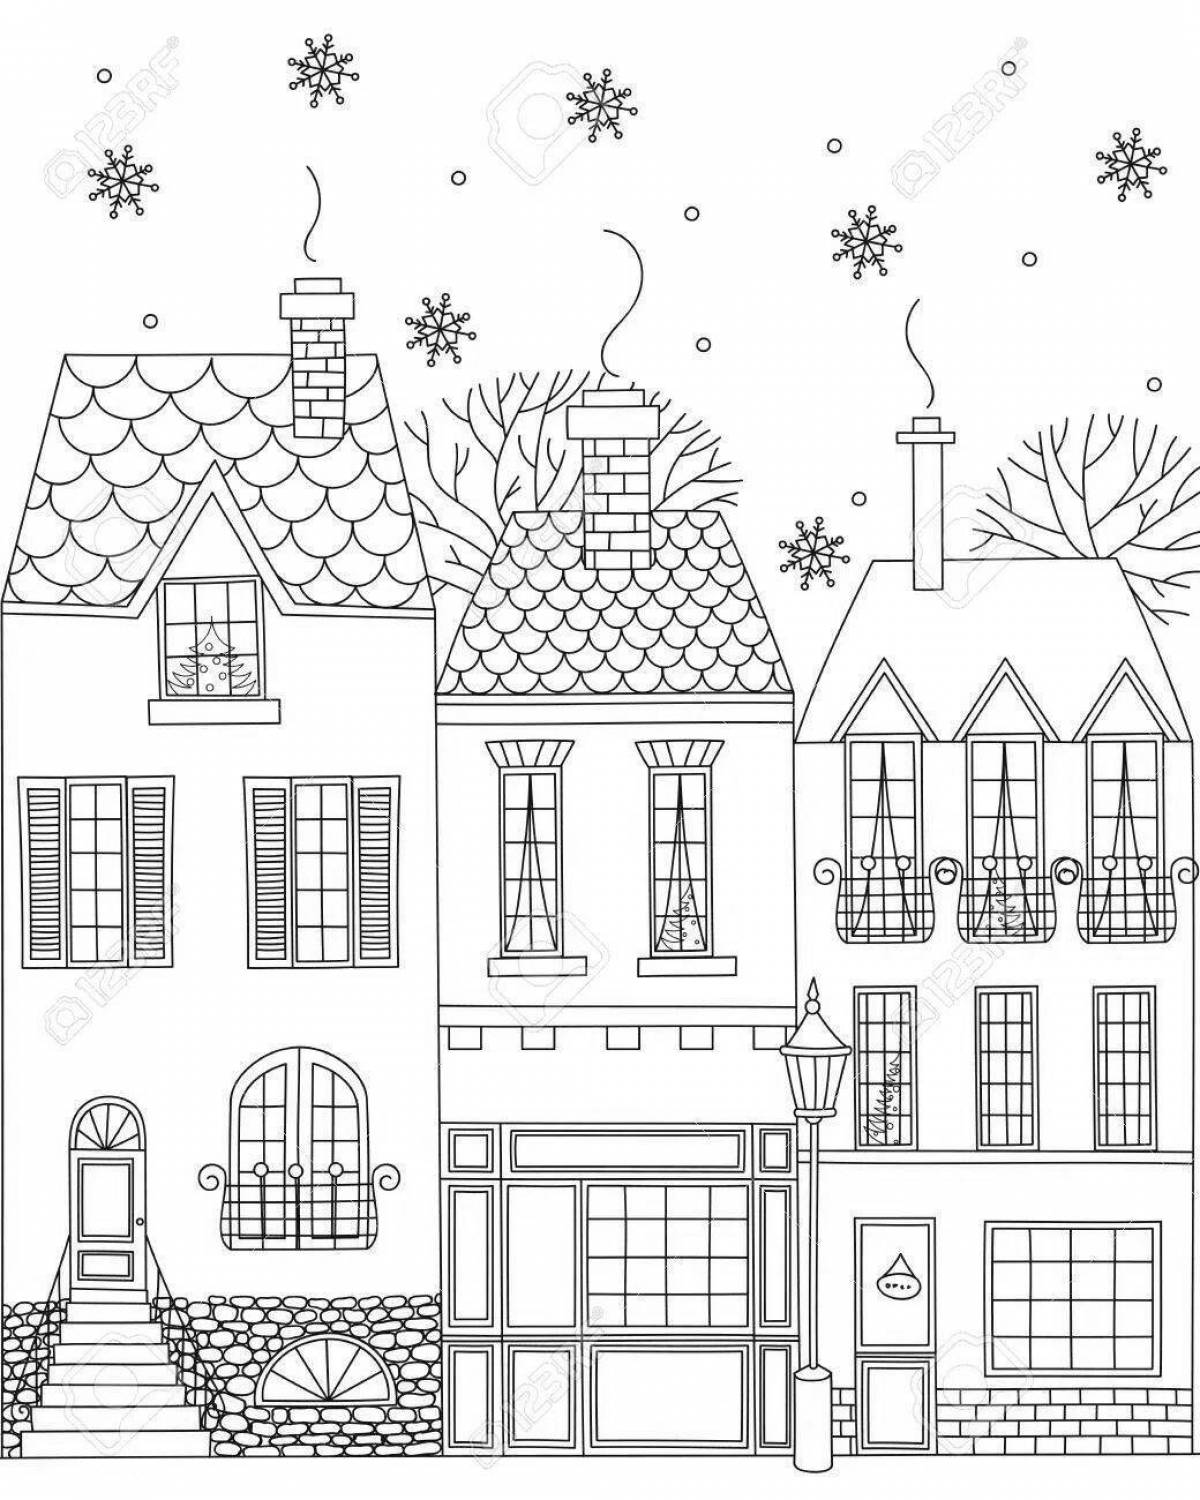 Colouring bright winter town for children